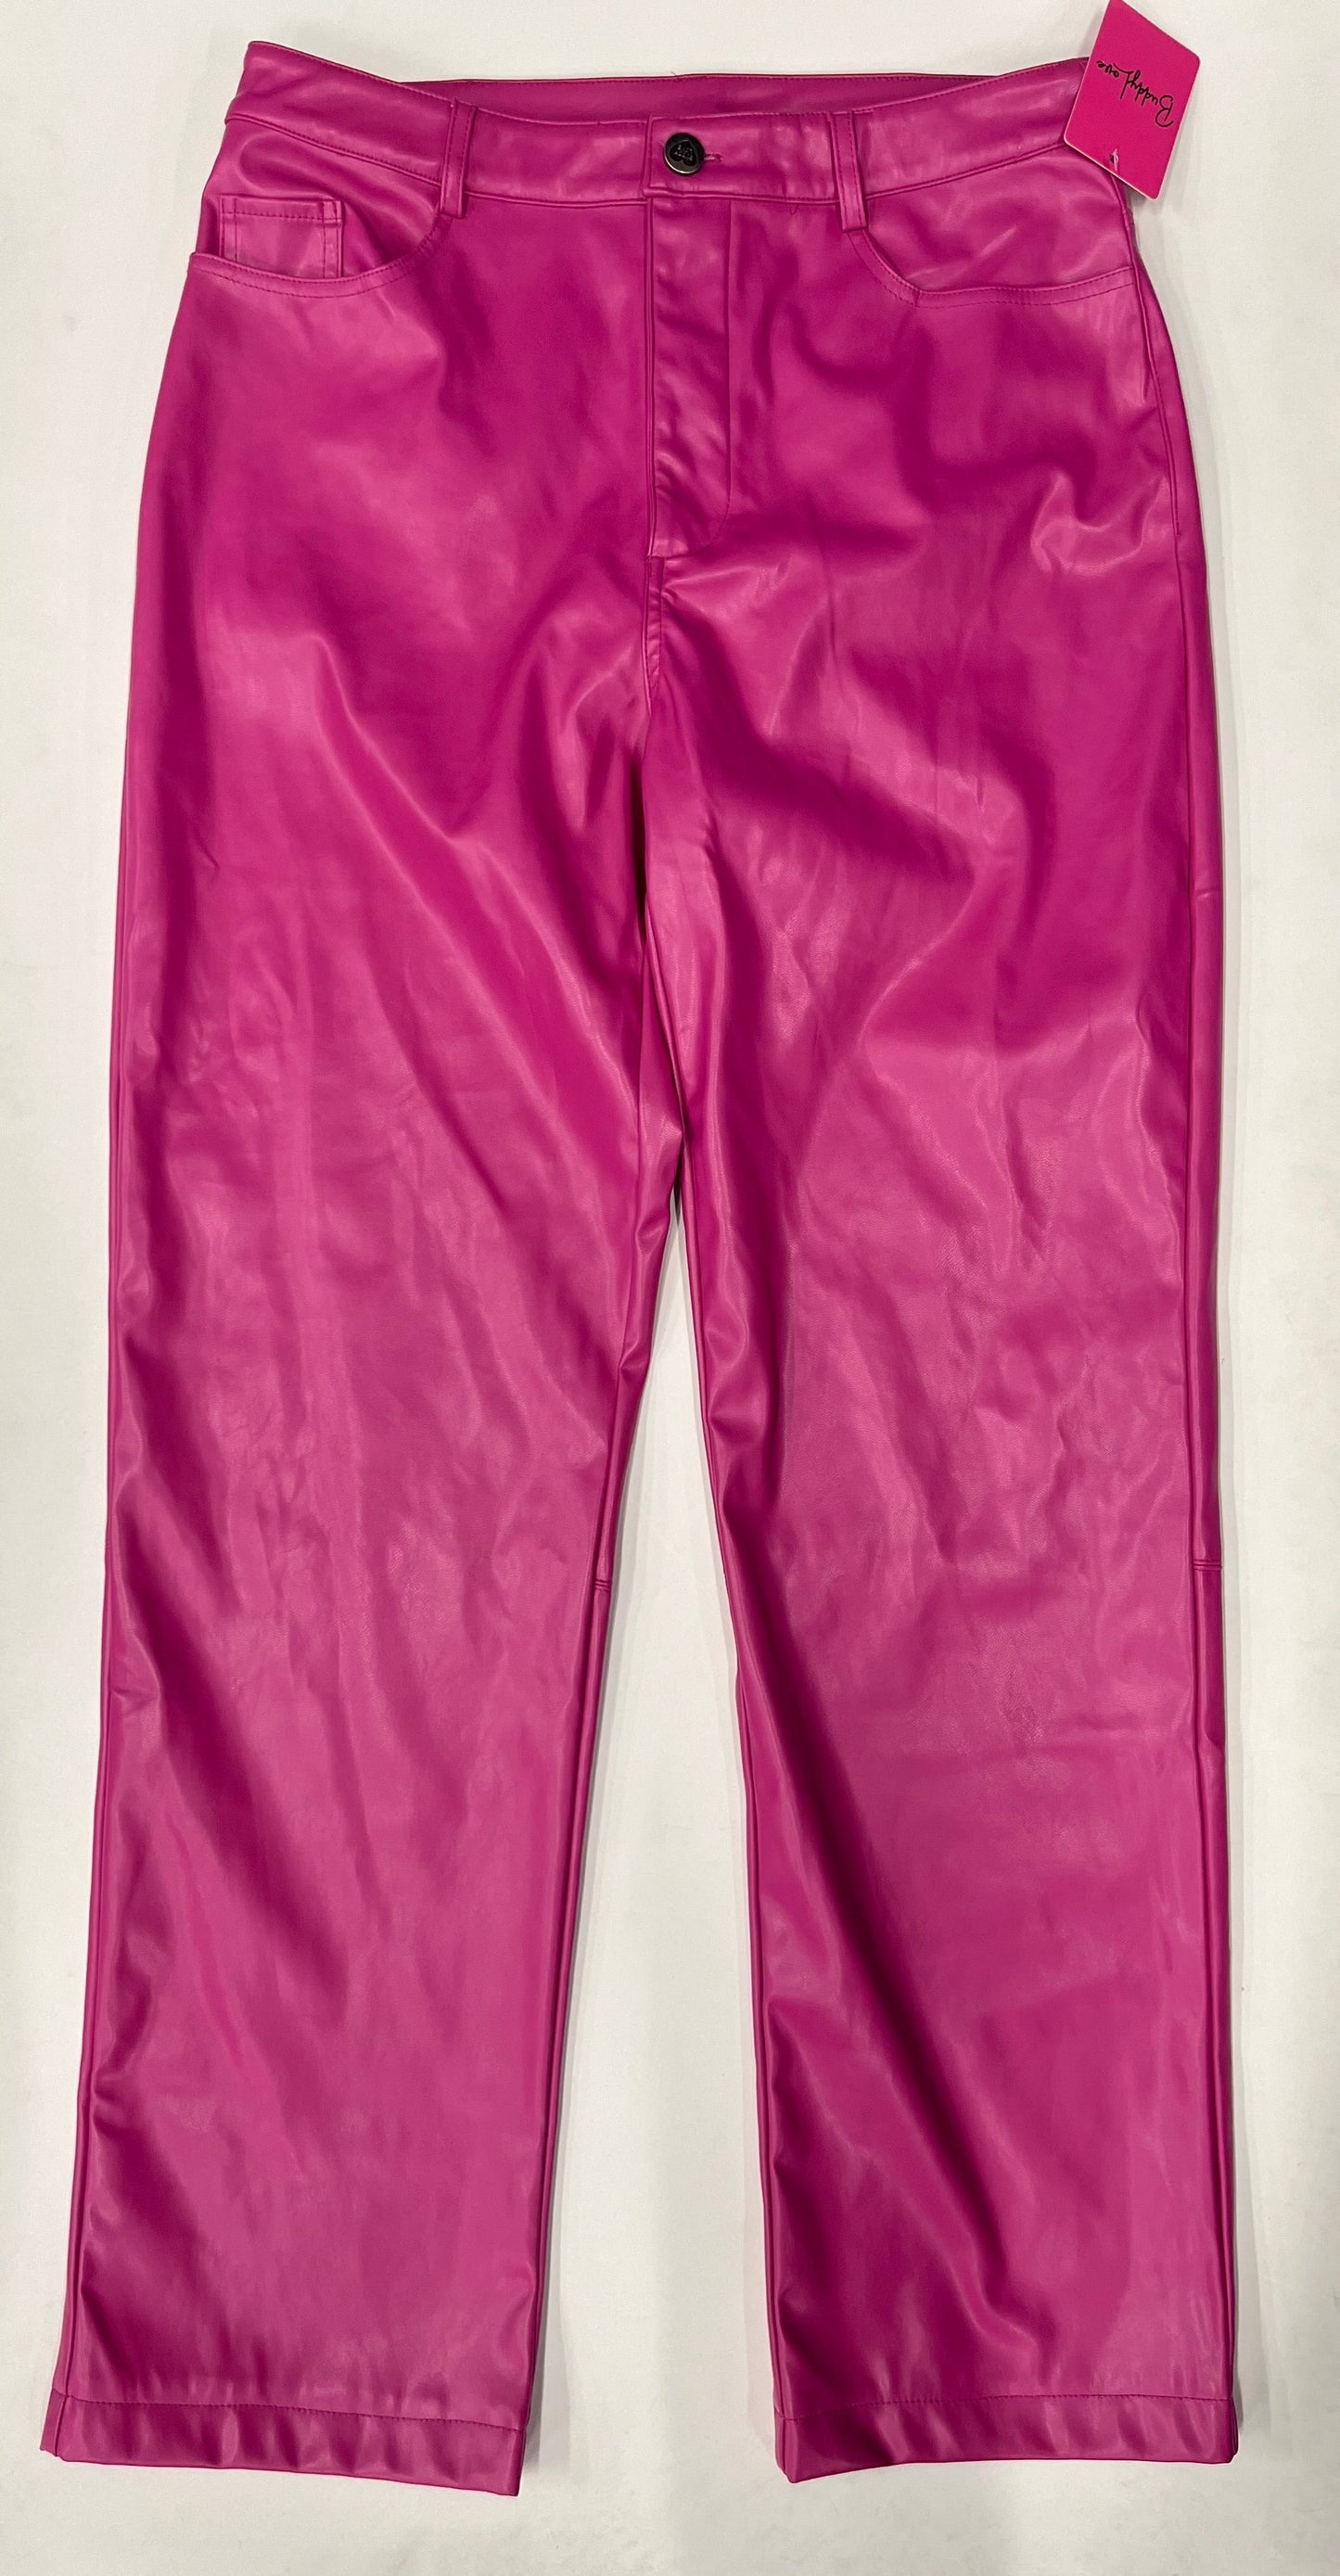 Pants Designer By Buddy Love NWT Size: 8